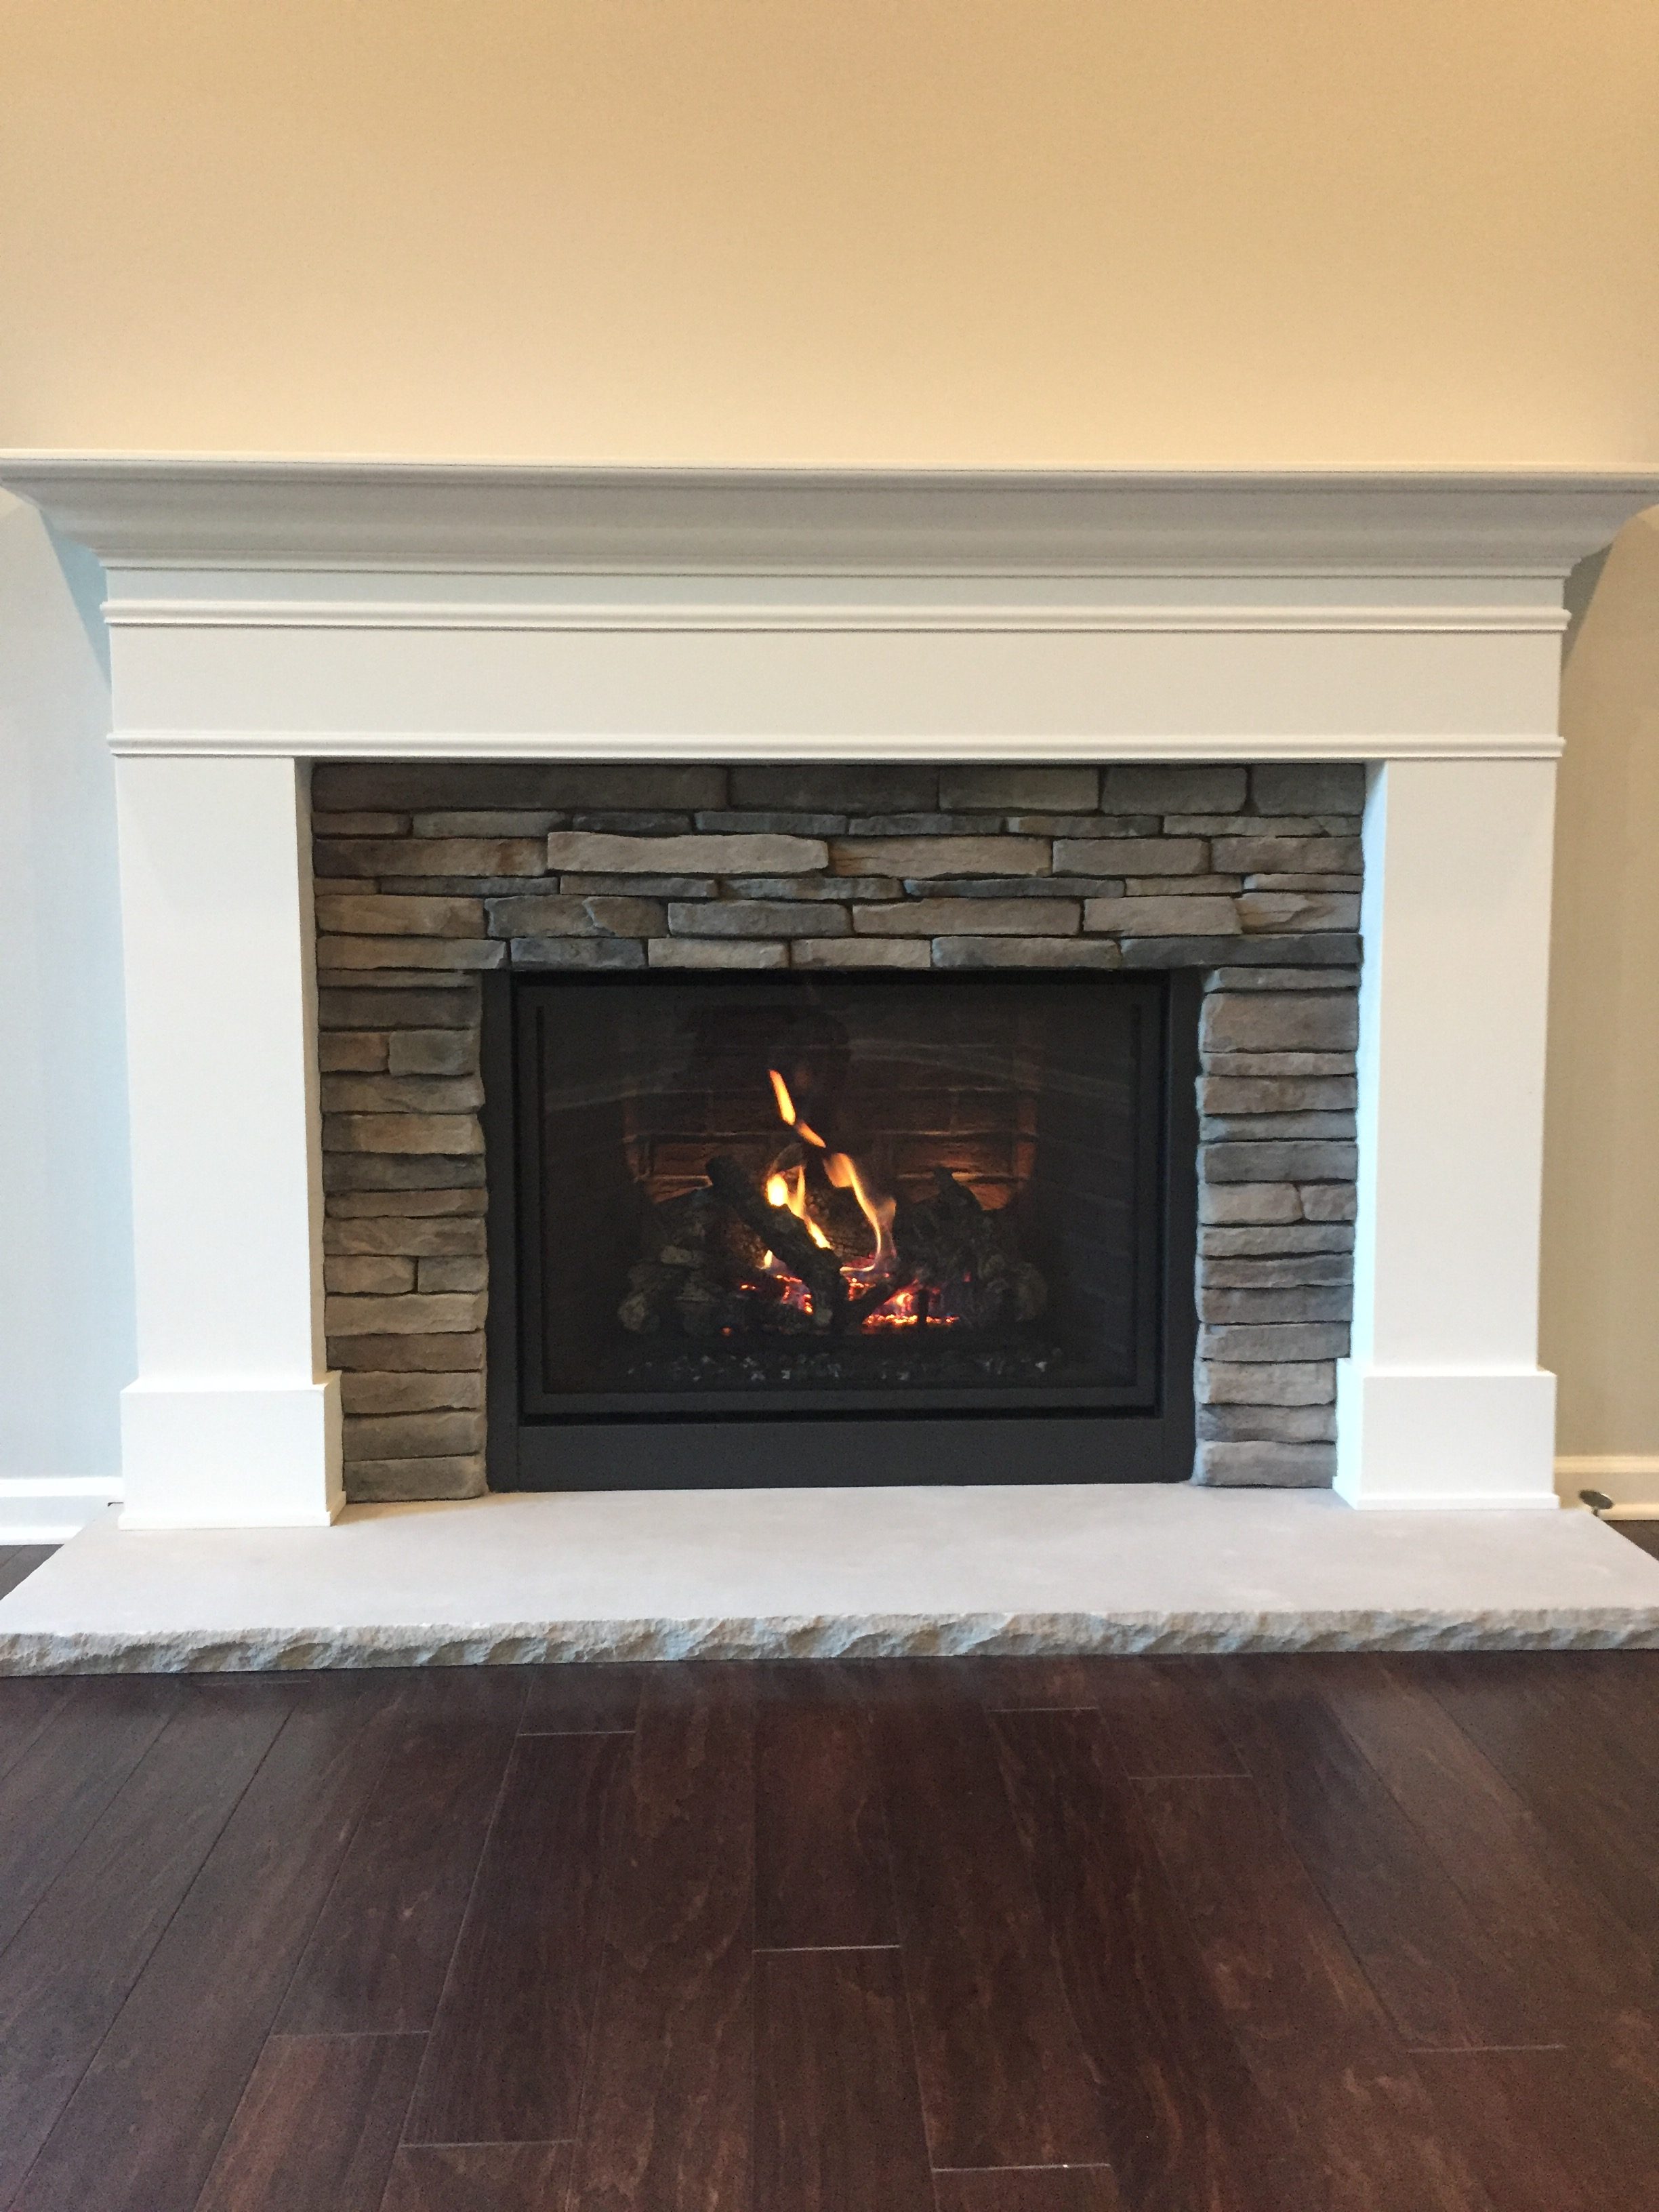 Image of a traditional 864TRV CleanFace gas fireplace by Travis Industries featuring stone facing and mantle.